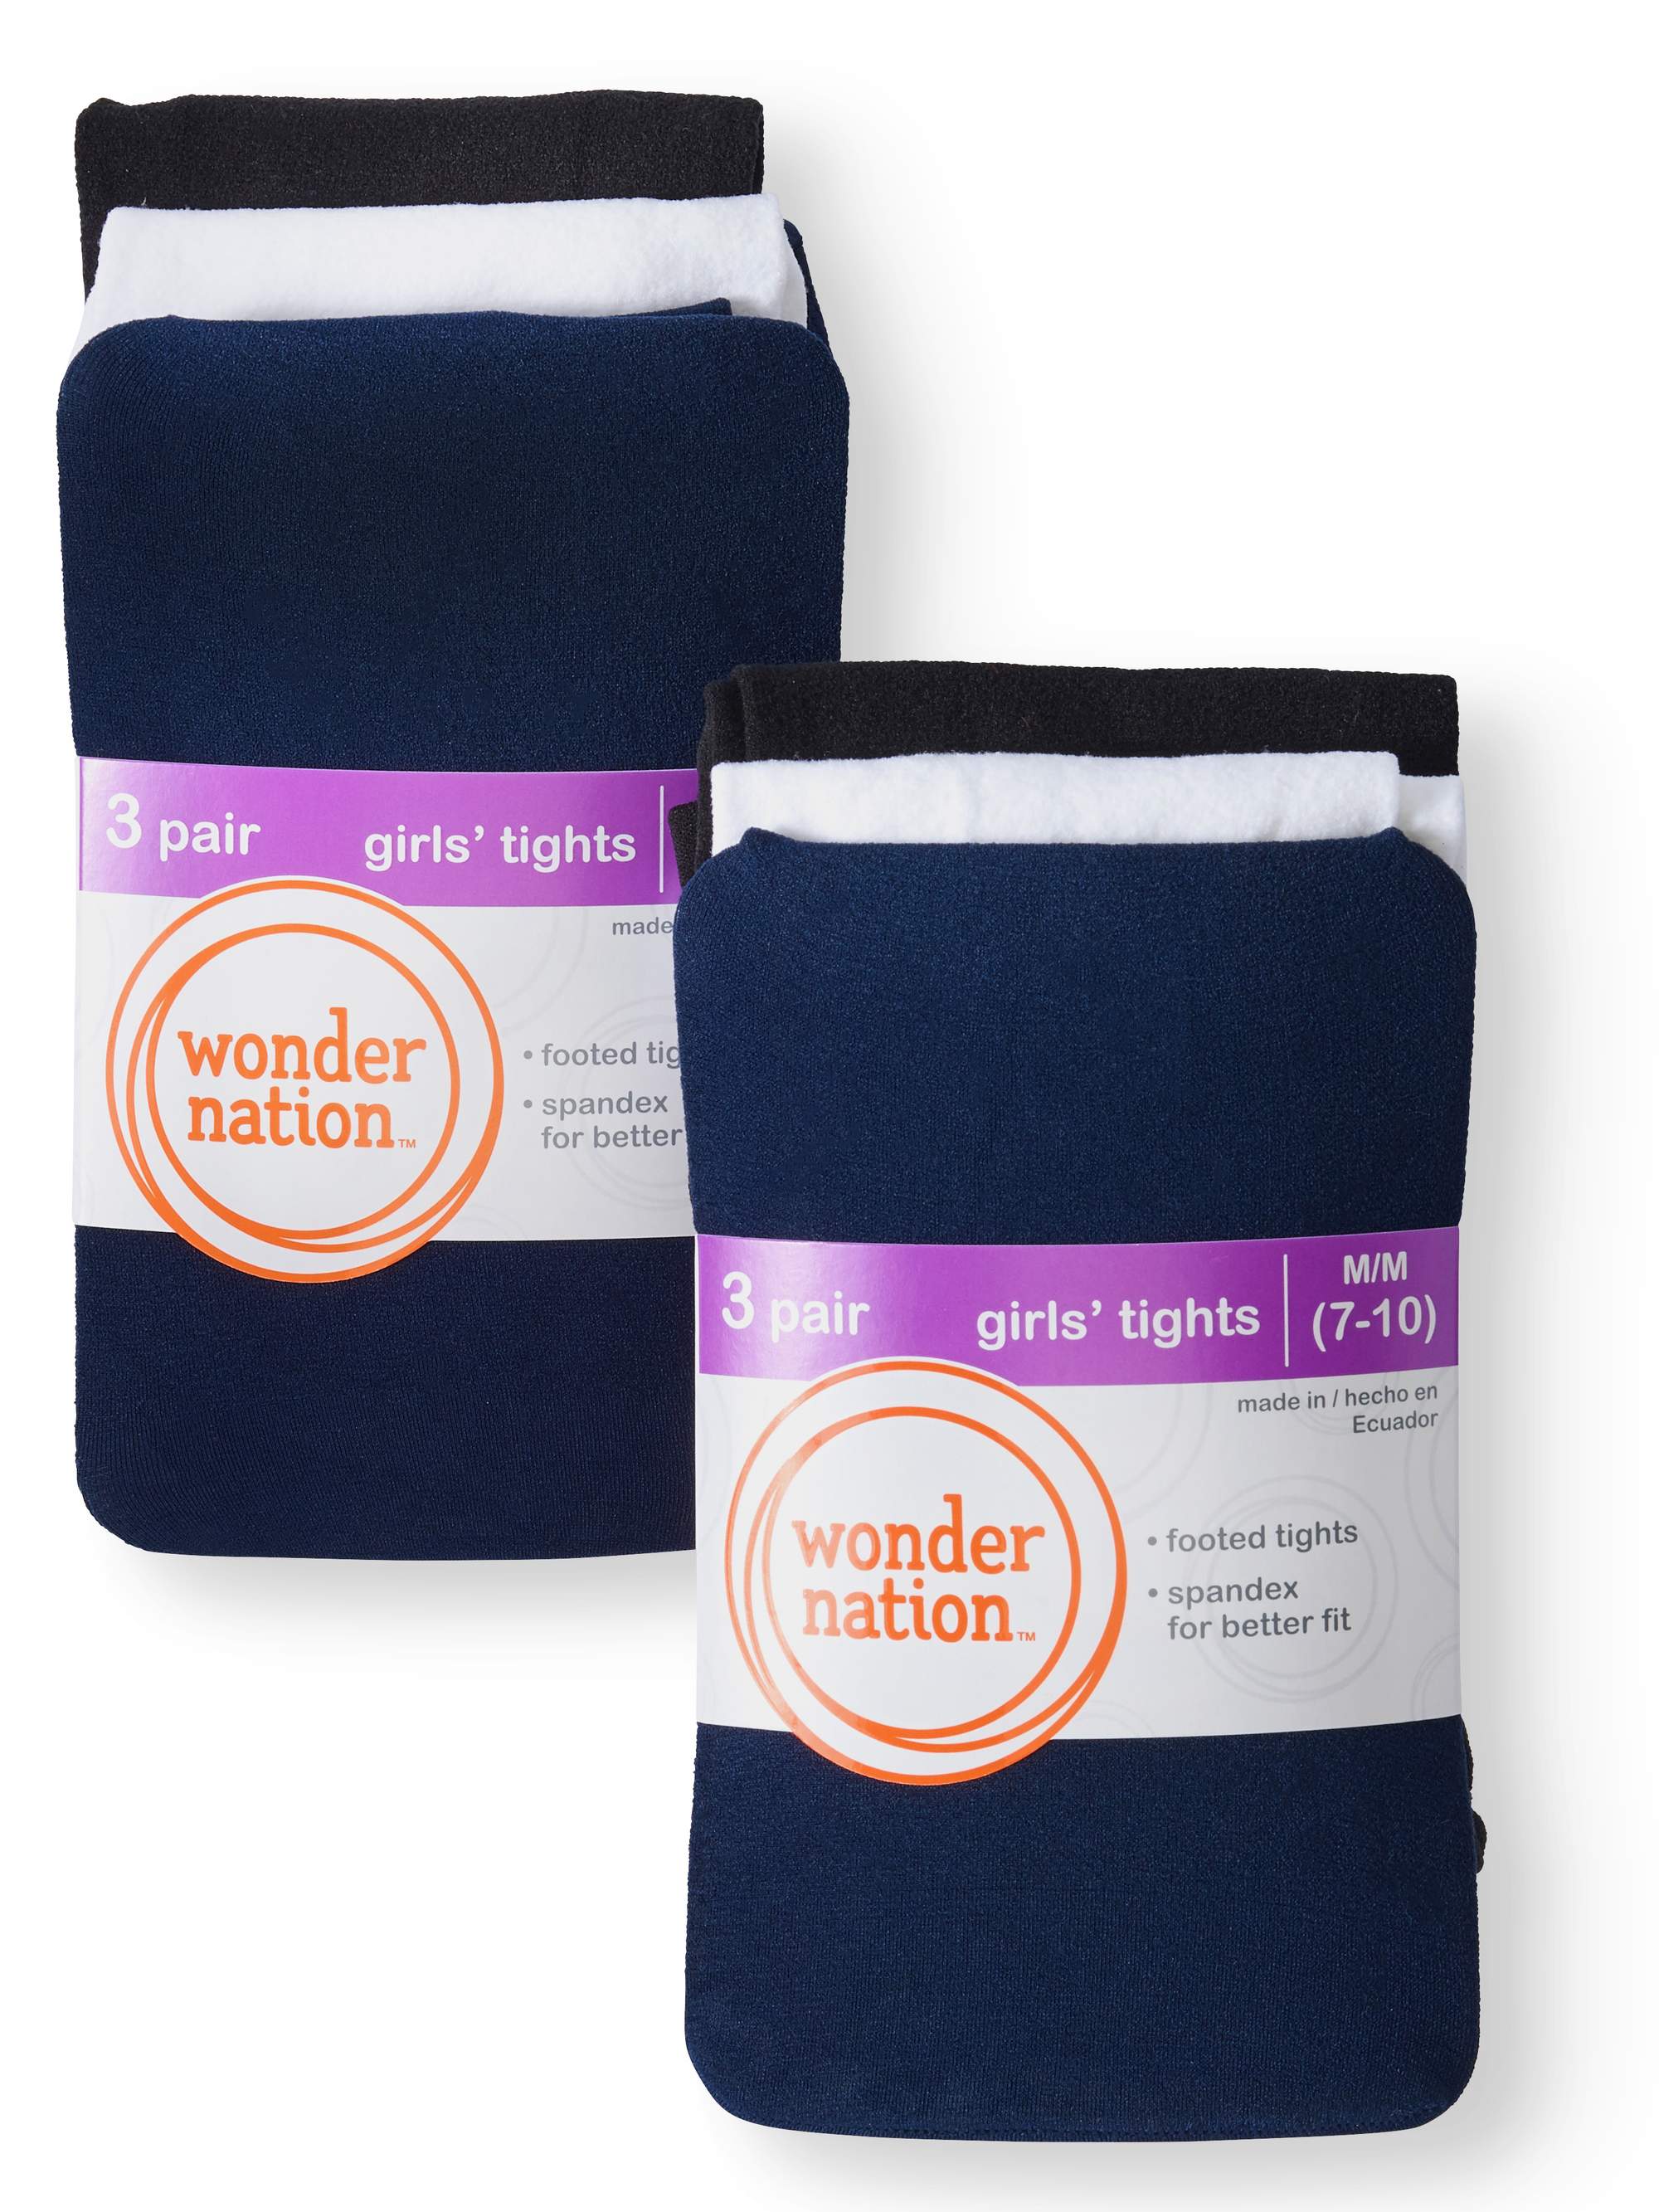 Wonder Nation Girls Opaque Tights 6-pack, Sizes S-L - image 1 of 1